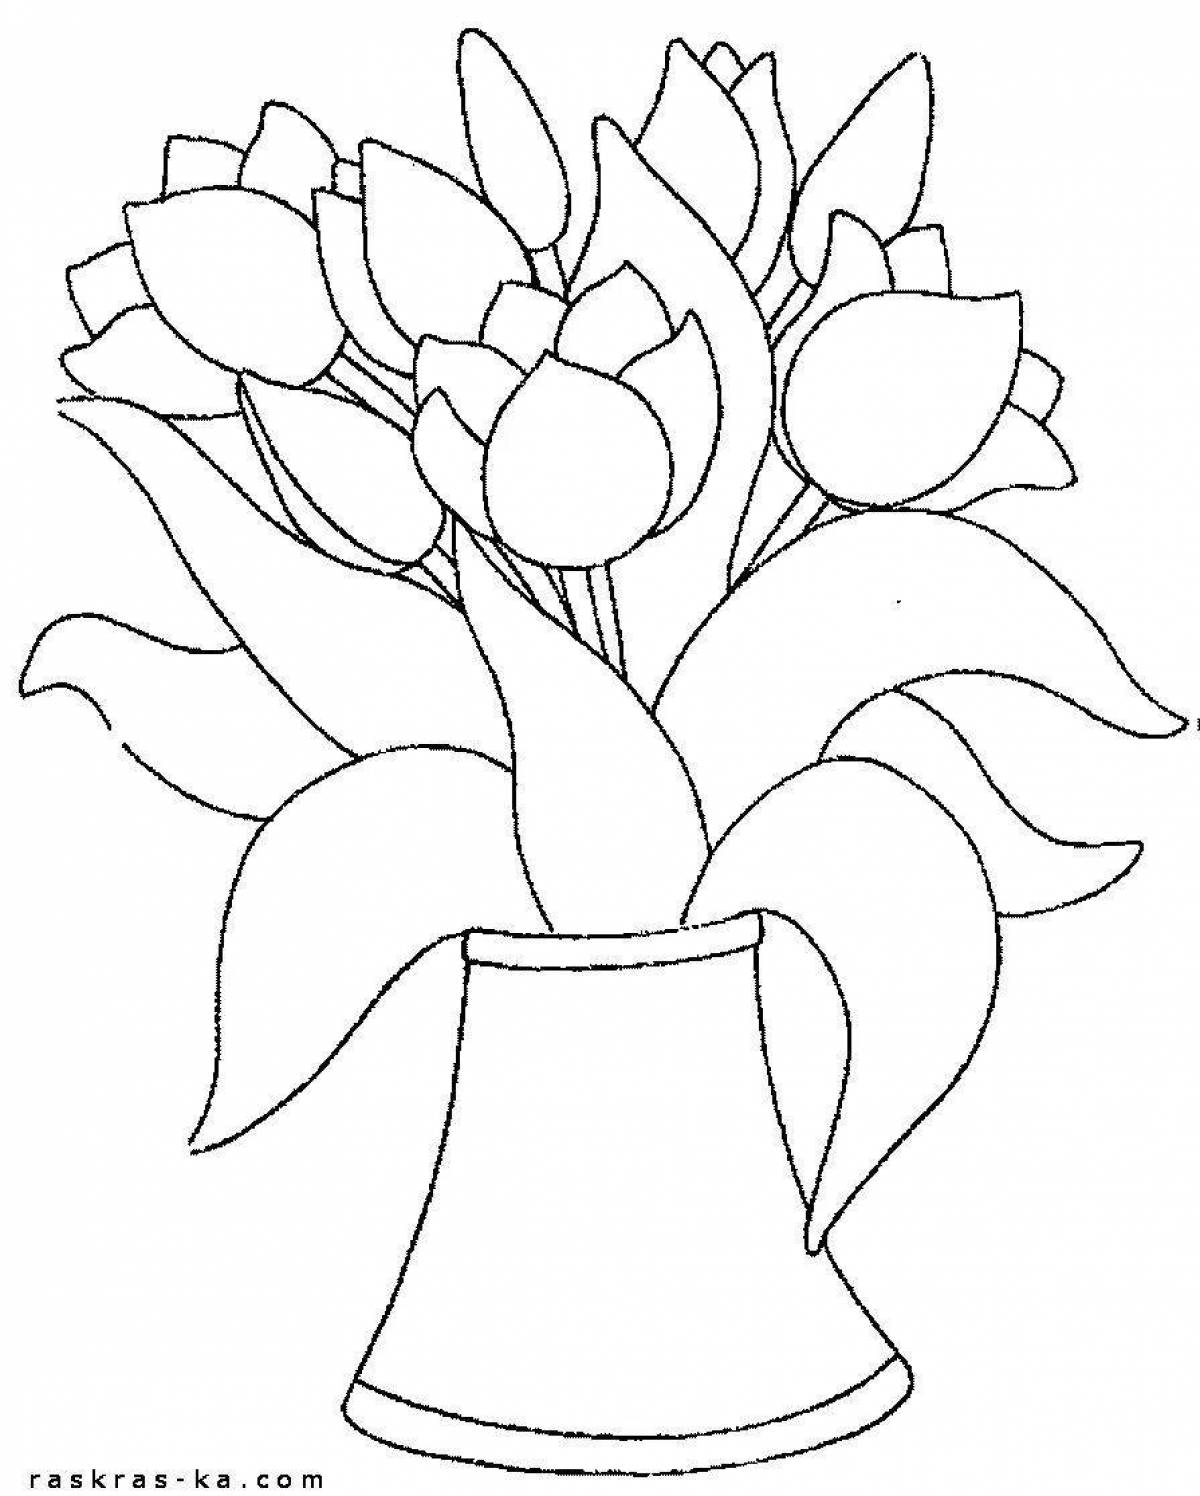 Coloring vase with flowers for children 5-6 years old